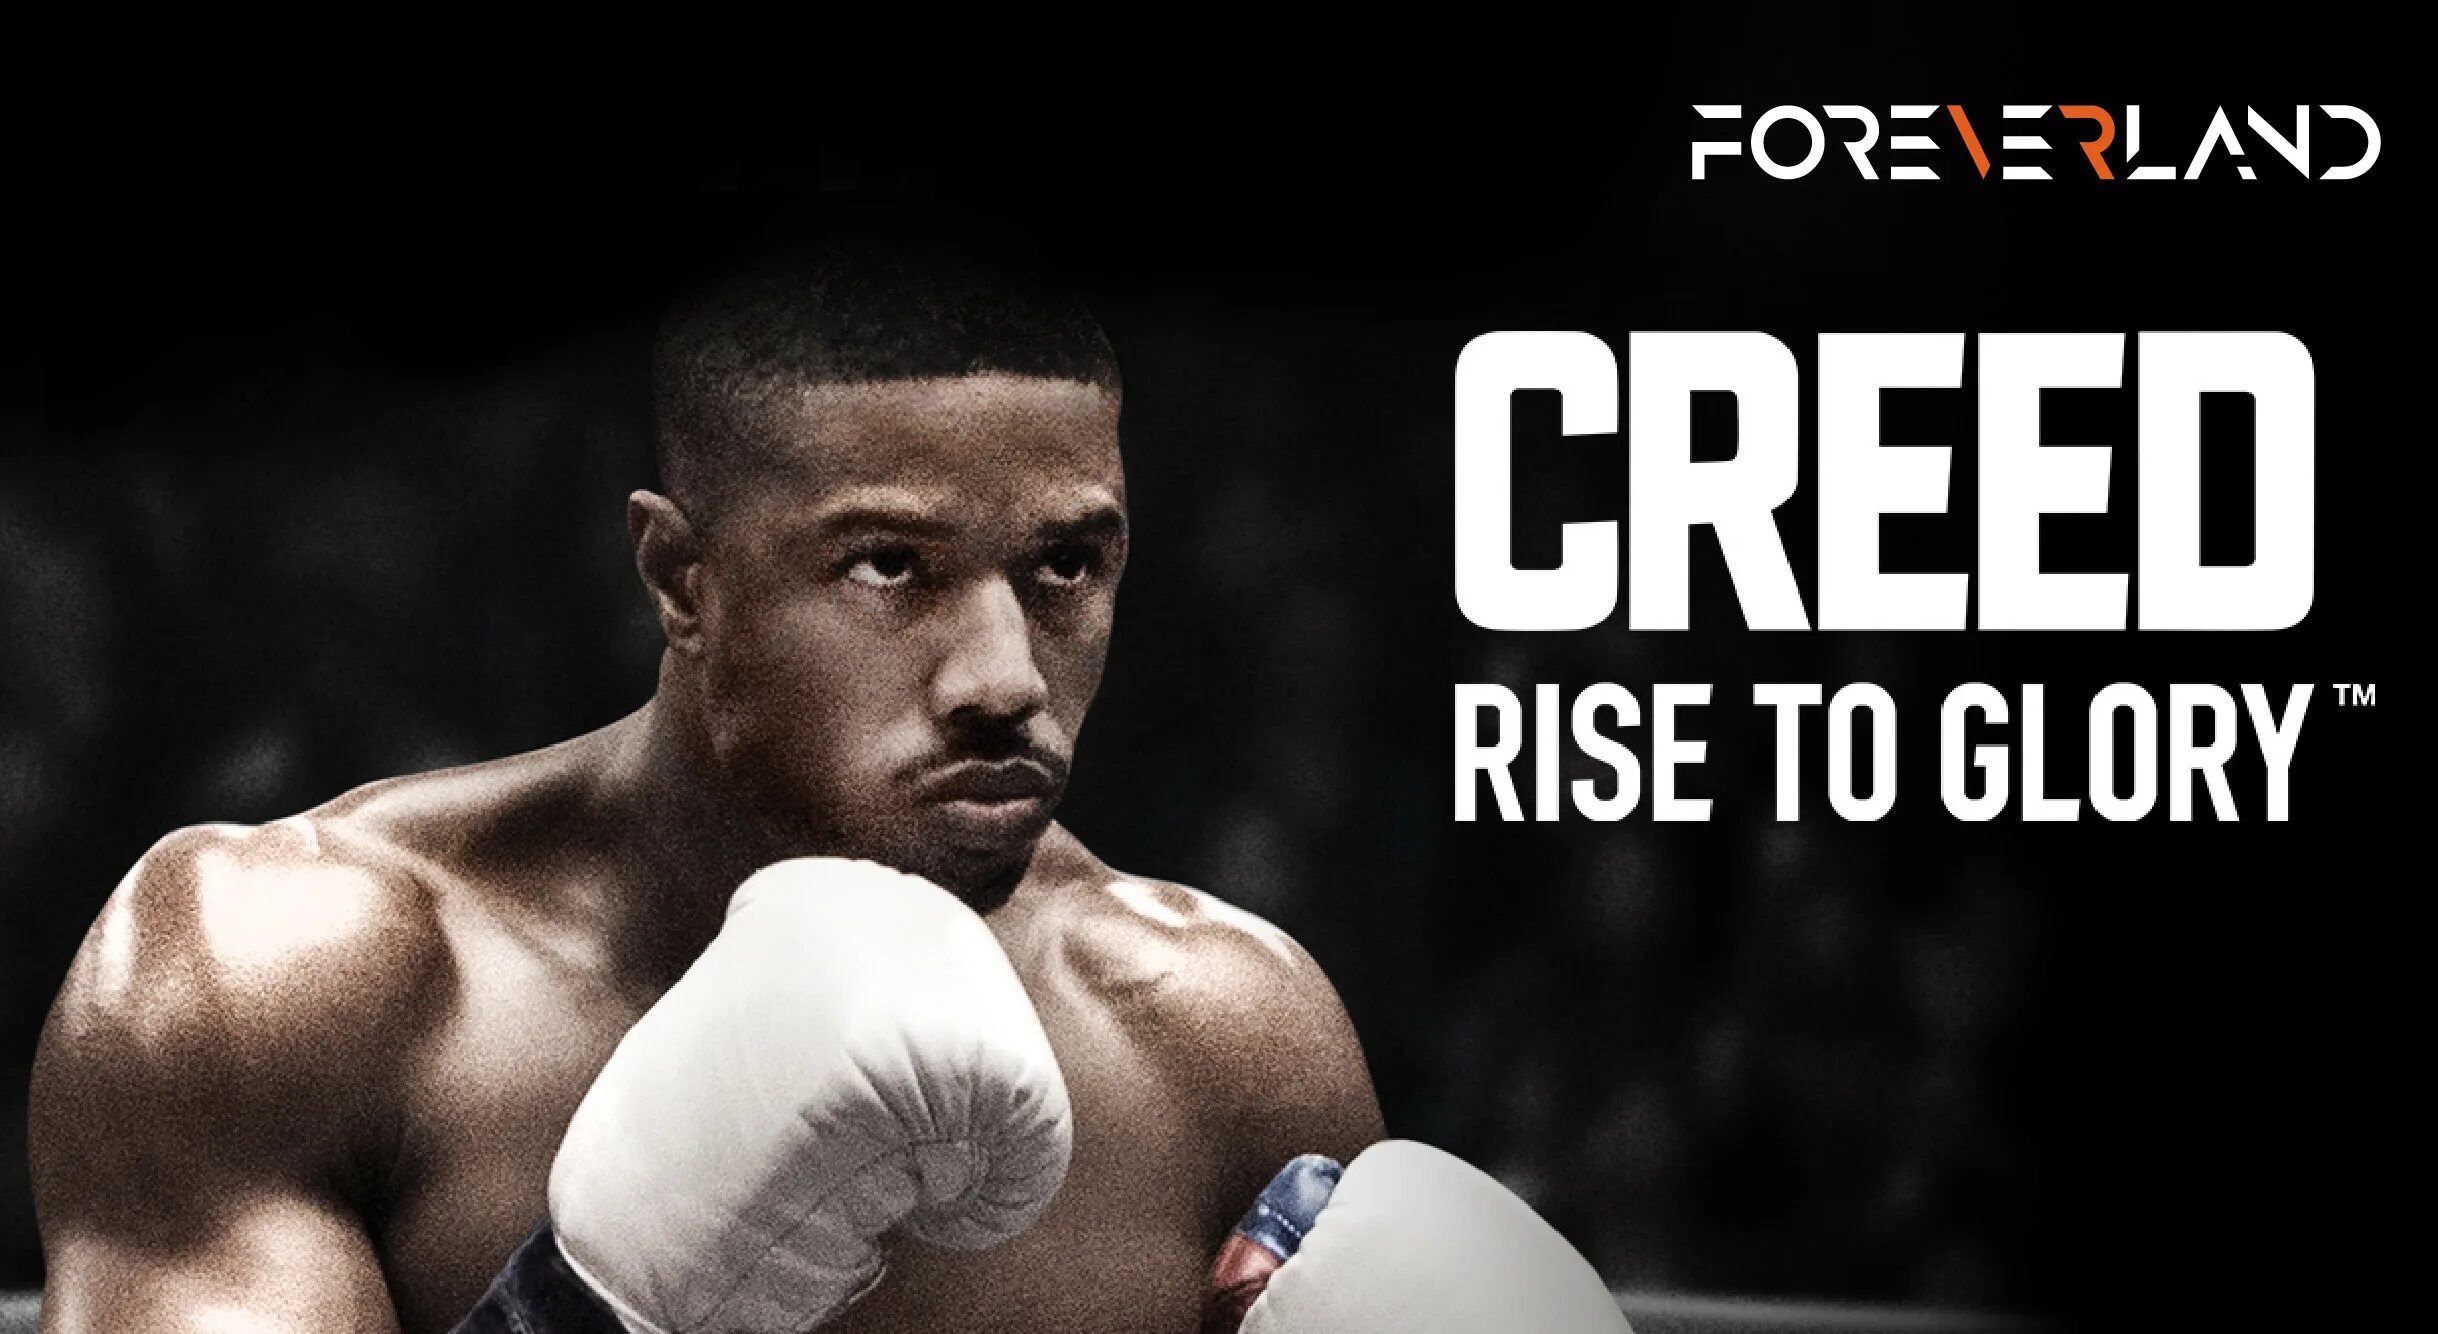 Creed glory vr. Creed Rise to Glory. Creed VR. Creed VR игра. Меню Creed: Rise to Glory.